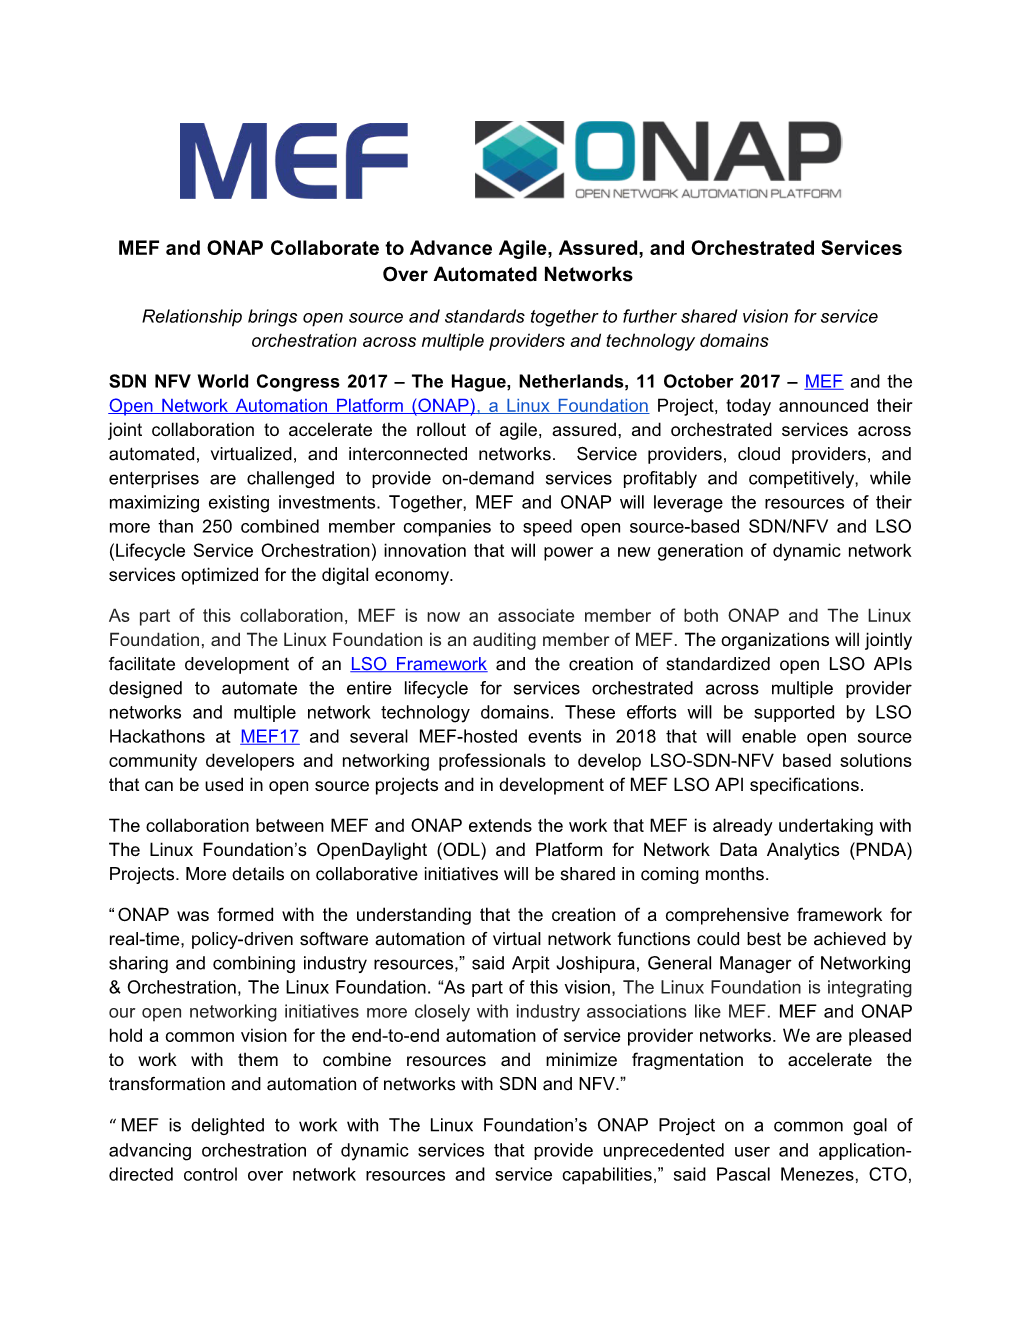 MEF and ONAP Collaborate to Advance Agile, Assured, and Orchestrated Servic Es Over Automated